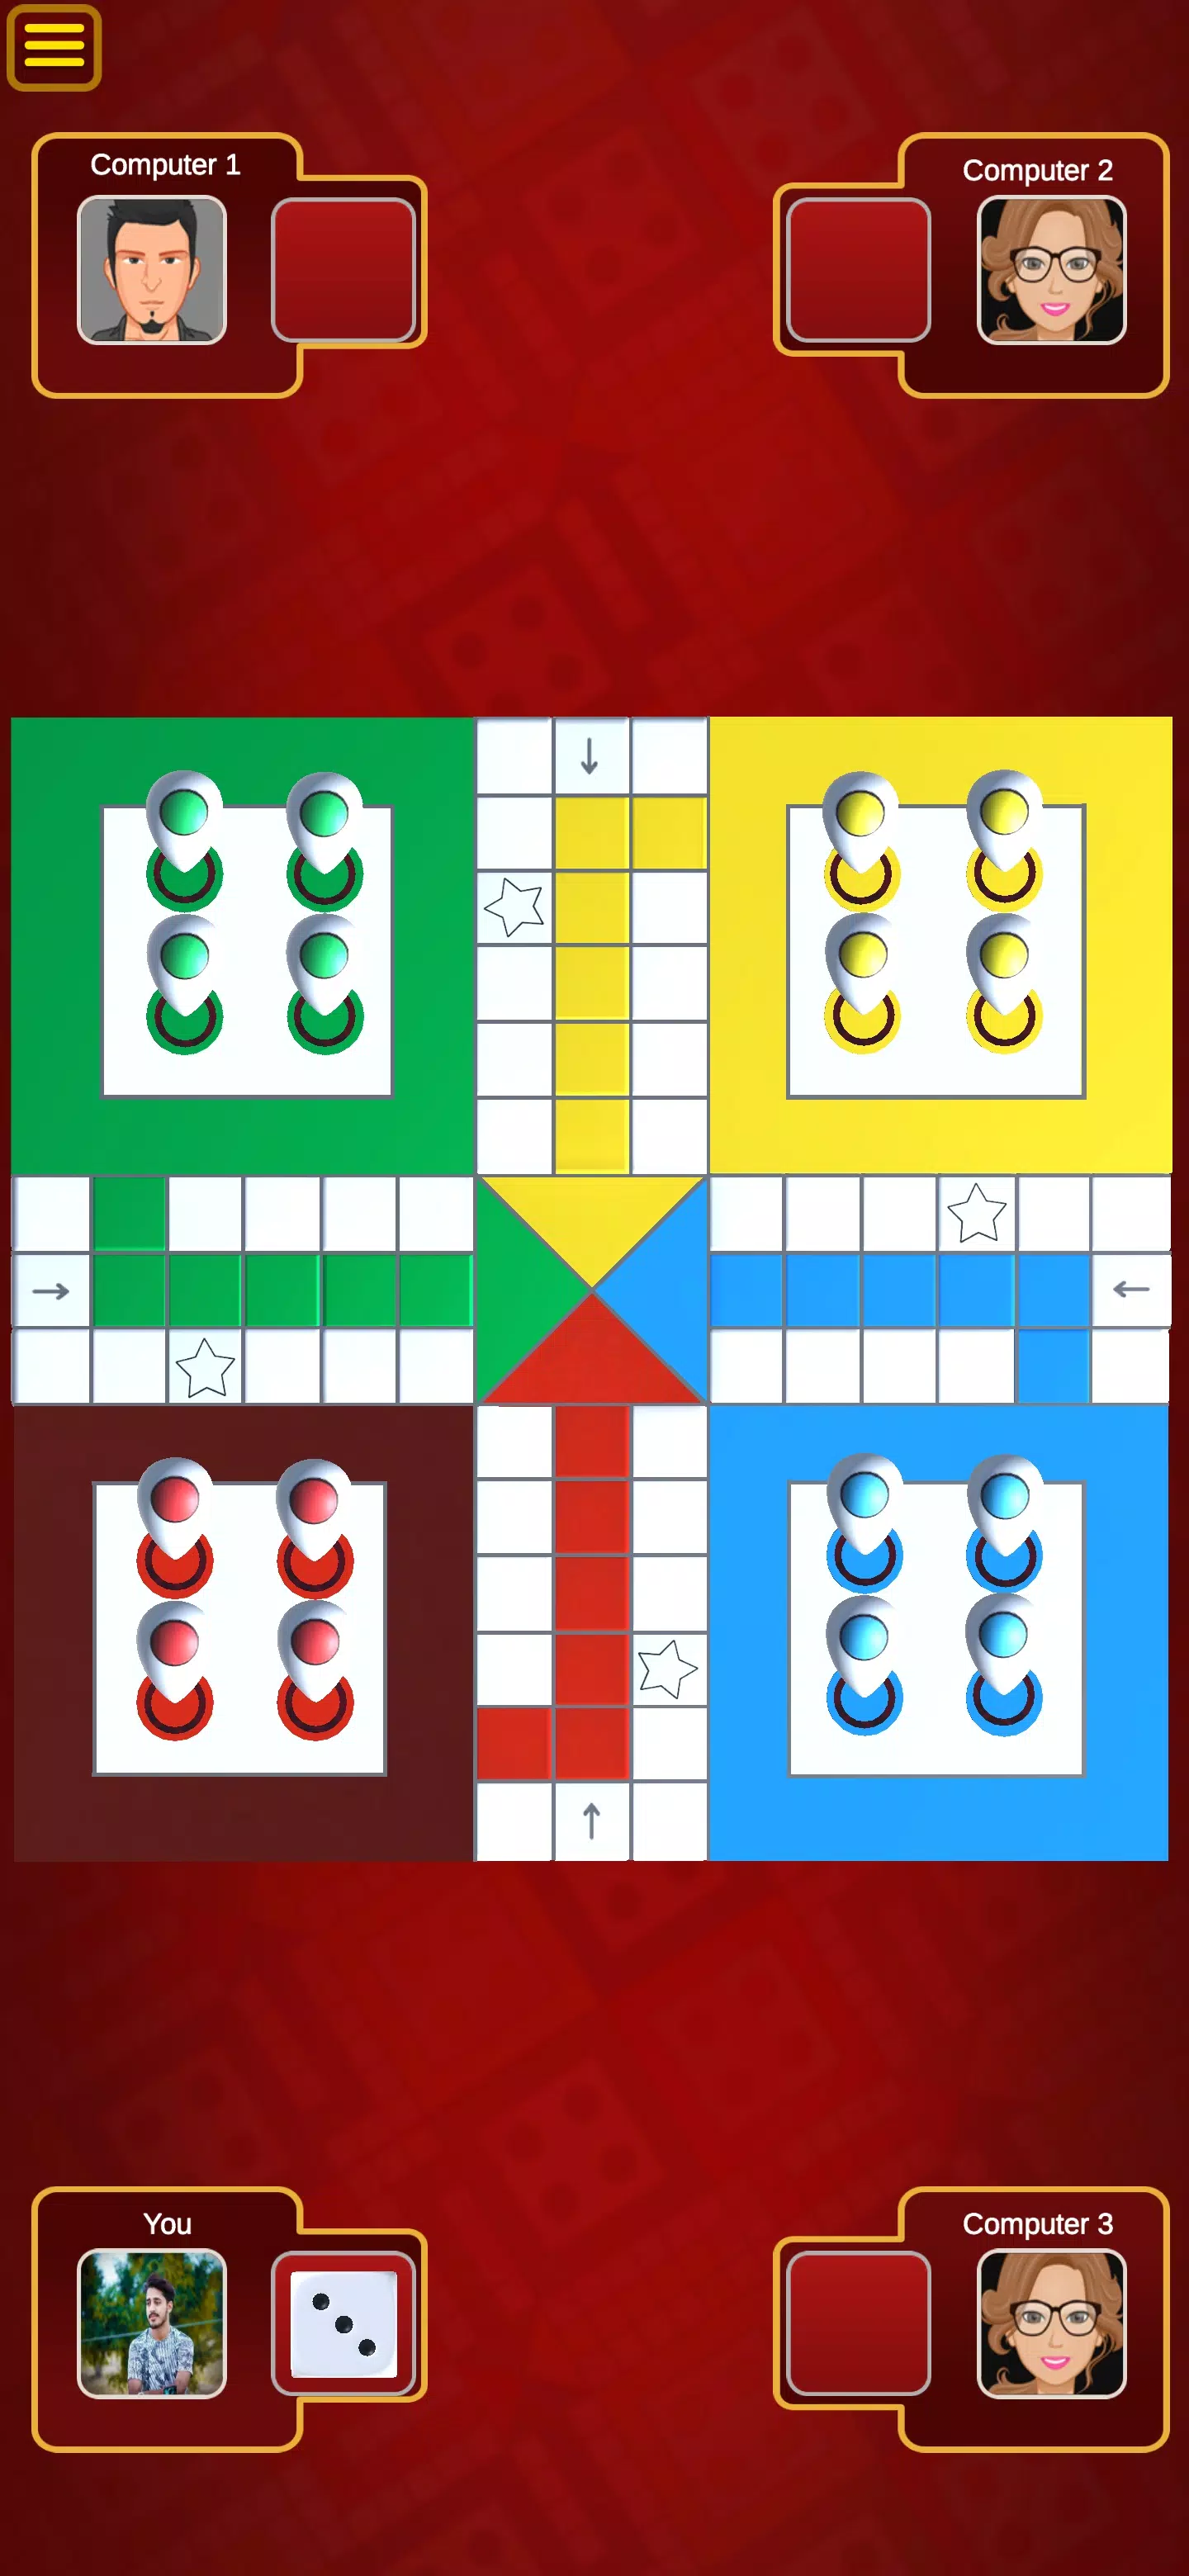 Ludo Sikandar on X: Ludo Sikandar - Multiplayer Online Ludo Game  👉 Play Ludo Game in Real Cash - India's First Real  Cash Game #LudoSikandar  / X